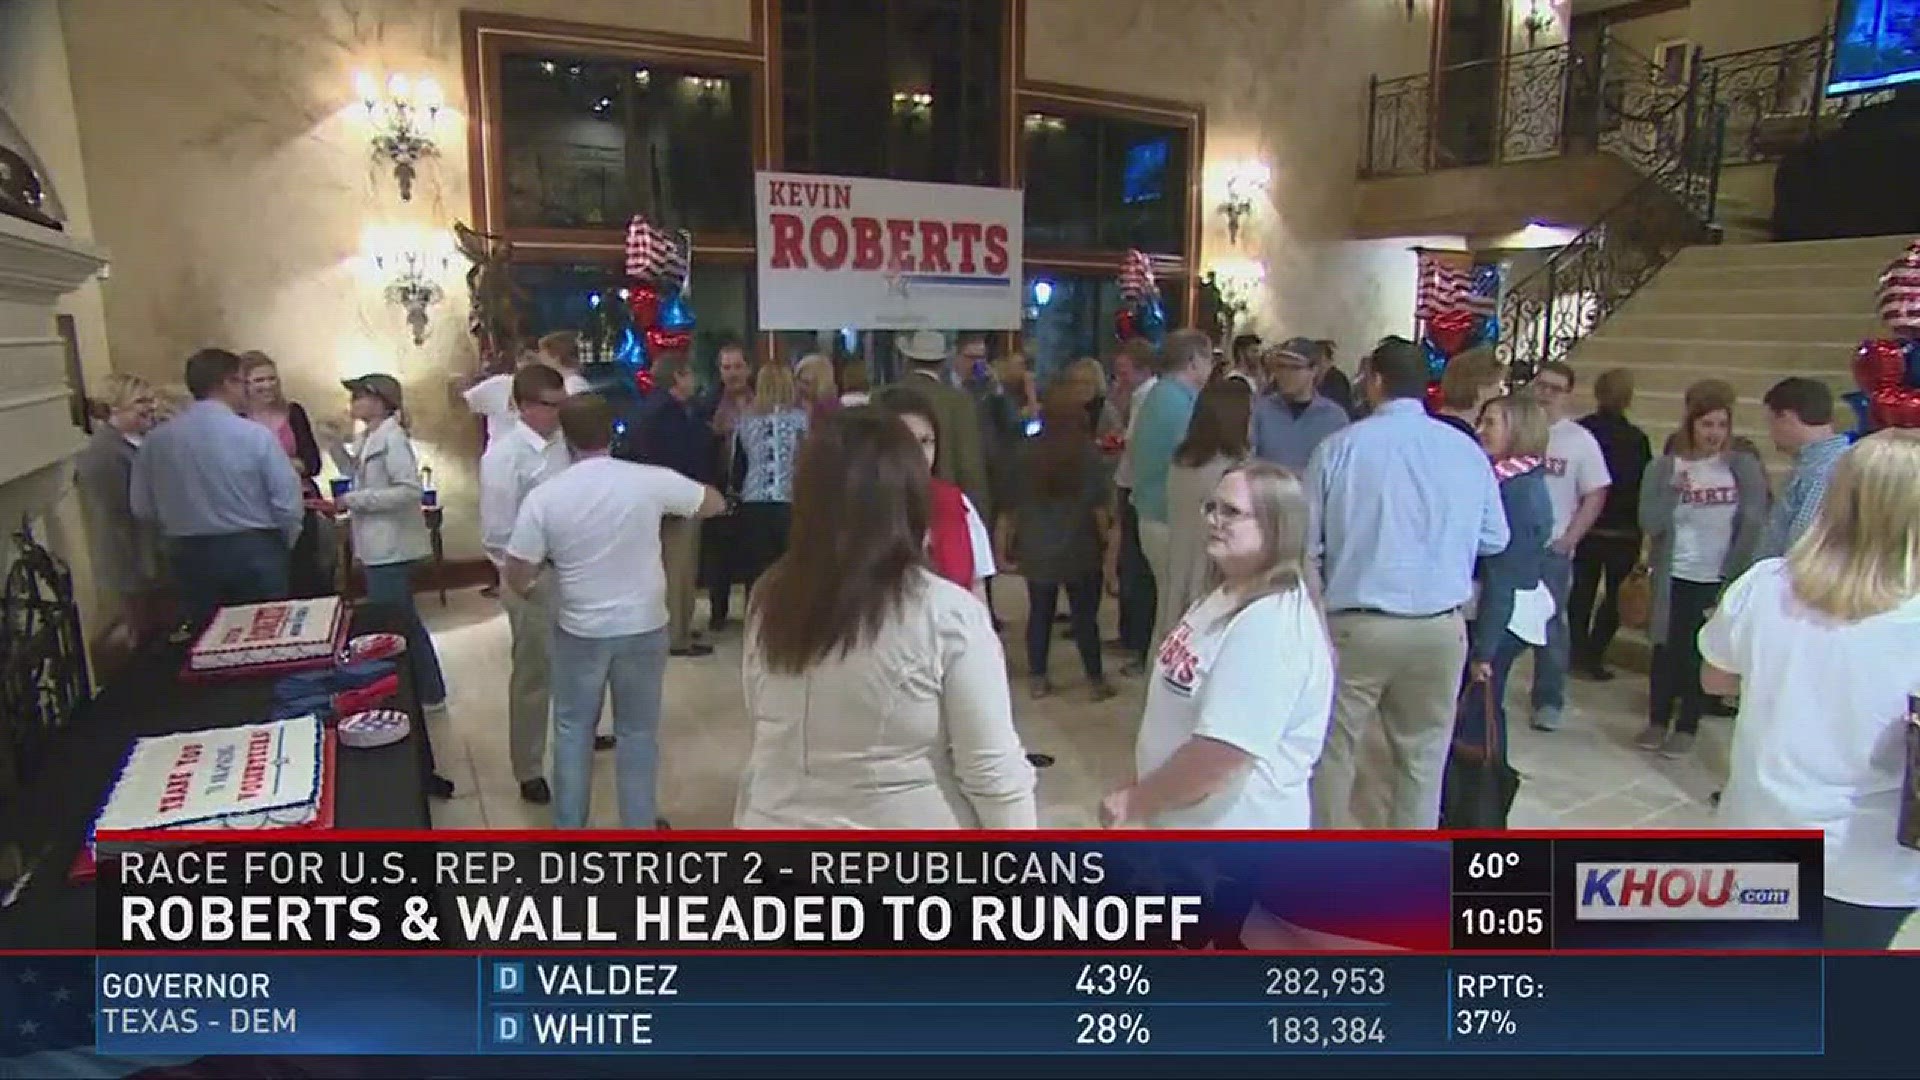 Kevin Roberts and Kathaleen Wall are headed to a runoff in the race for US Representative for District 2.